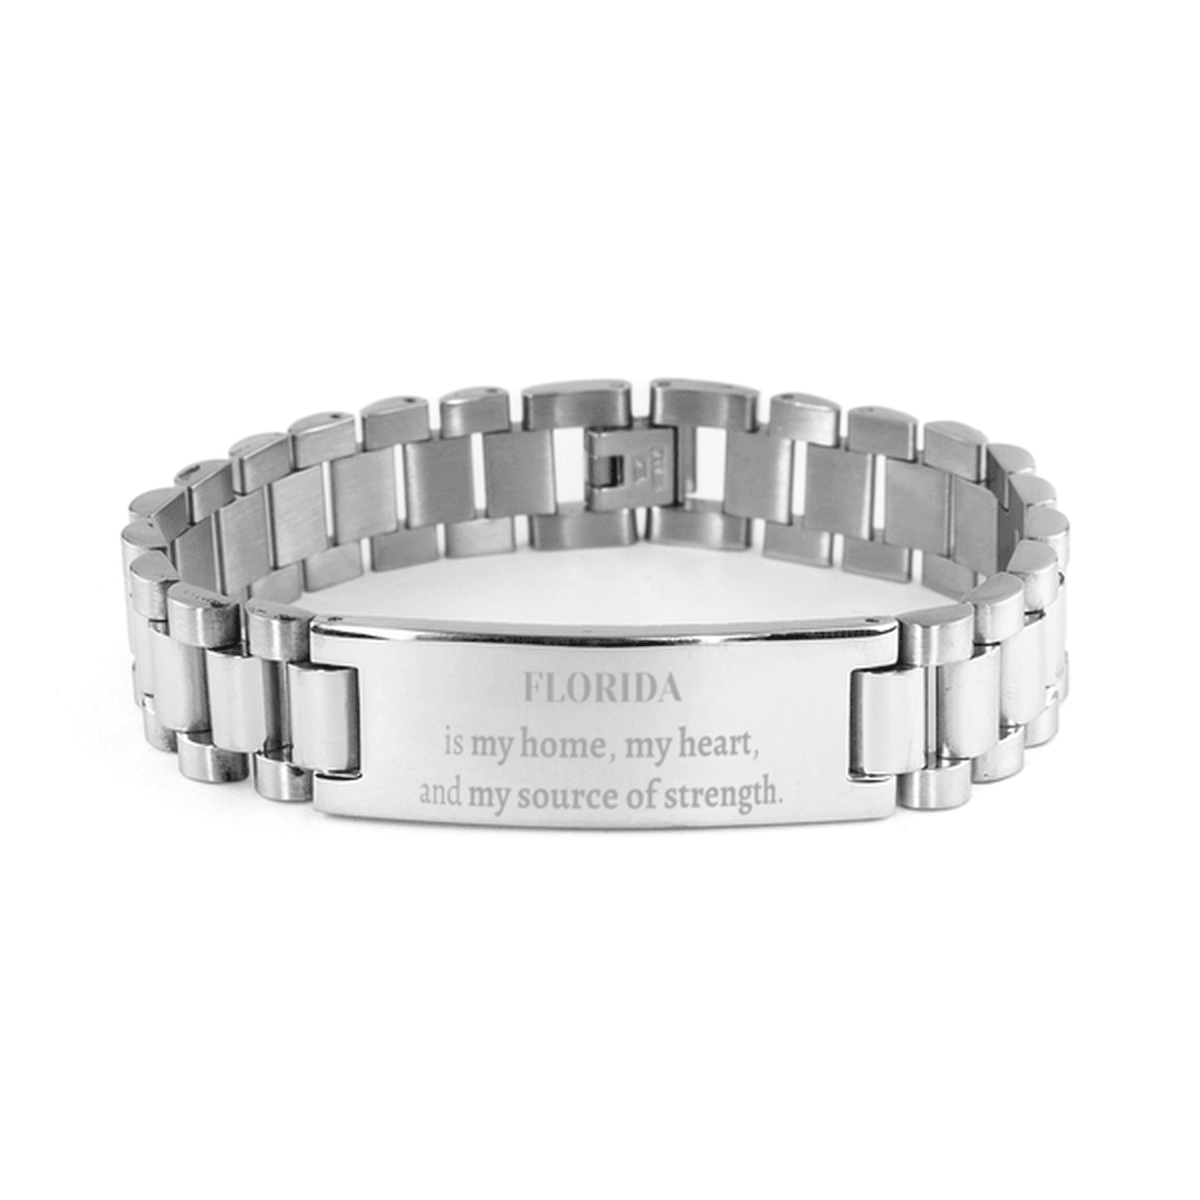 Florida is my home Gifts, Lovely Florida Birthday Christmas Ladder Stainless Steel Bracelet For People from Florida, Men, Women, Friends - Mallard Moon Gift Shop